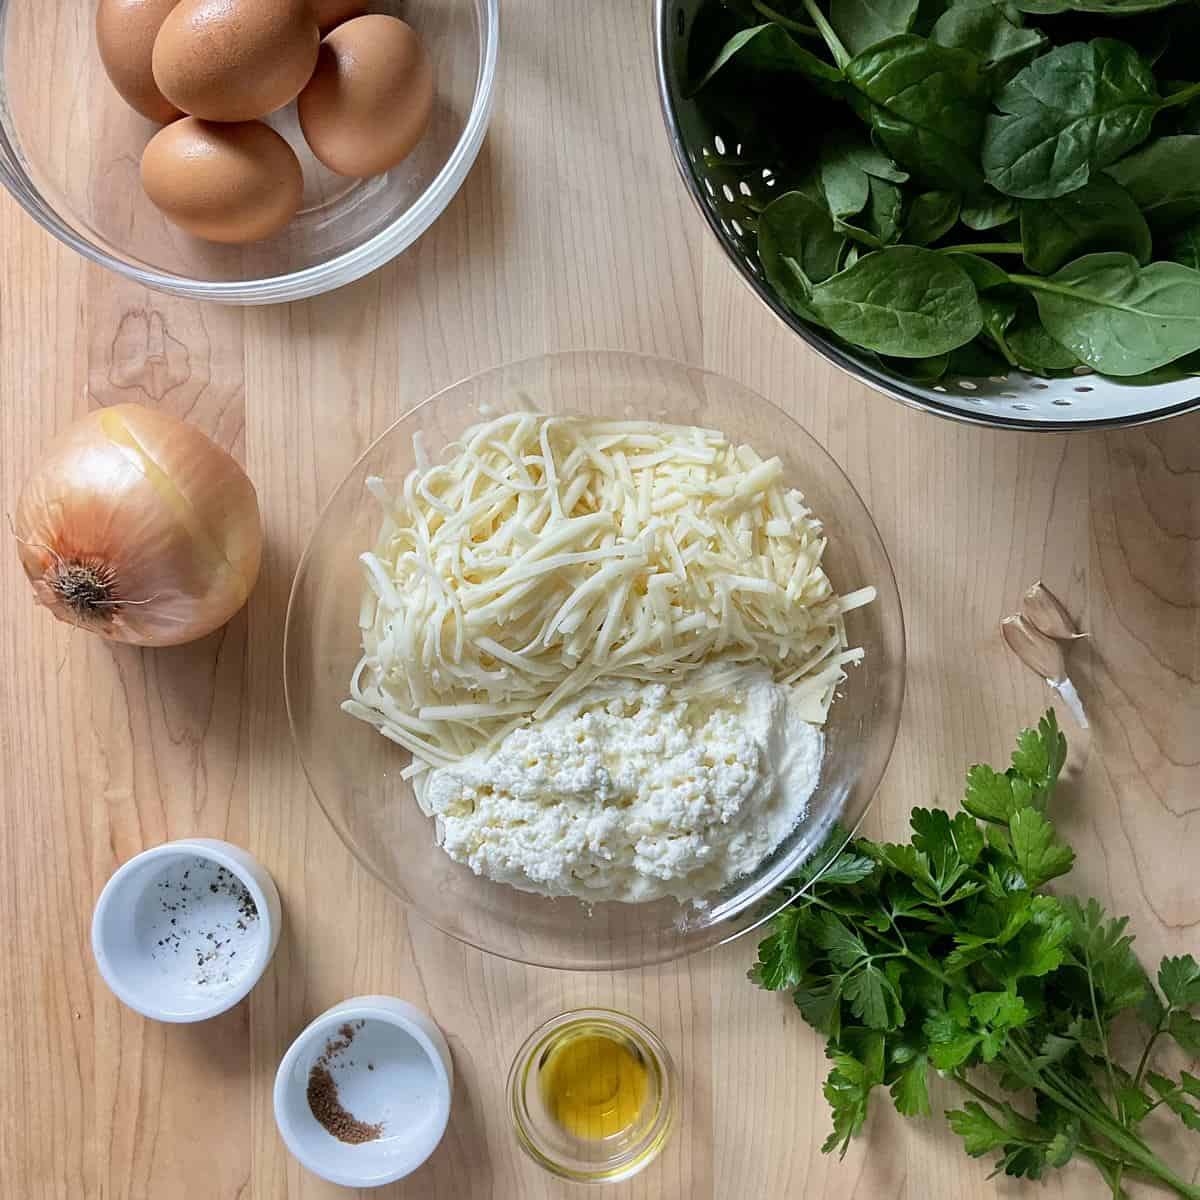 Ingredients to make a spinach quiche without a crust on a wooden board.